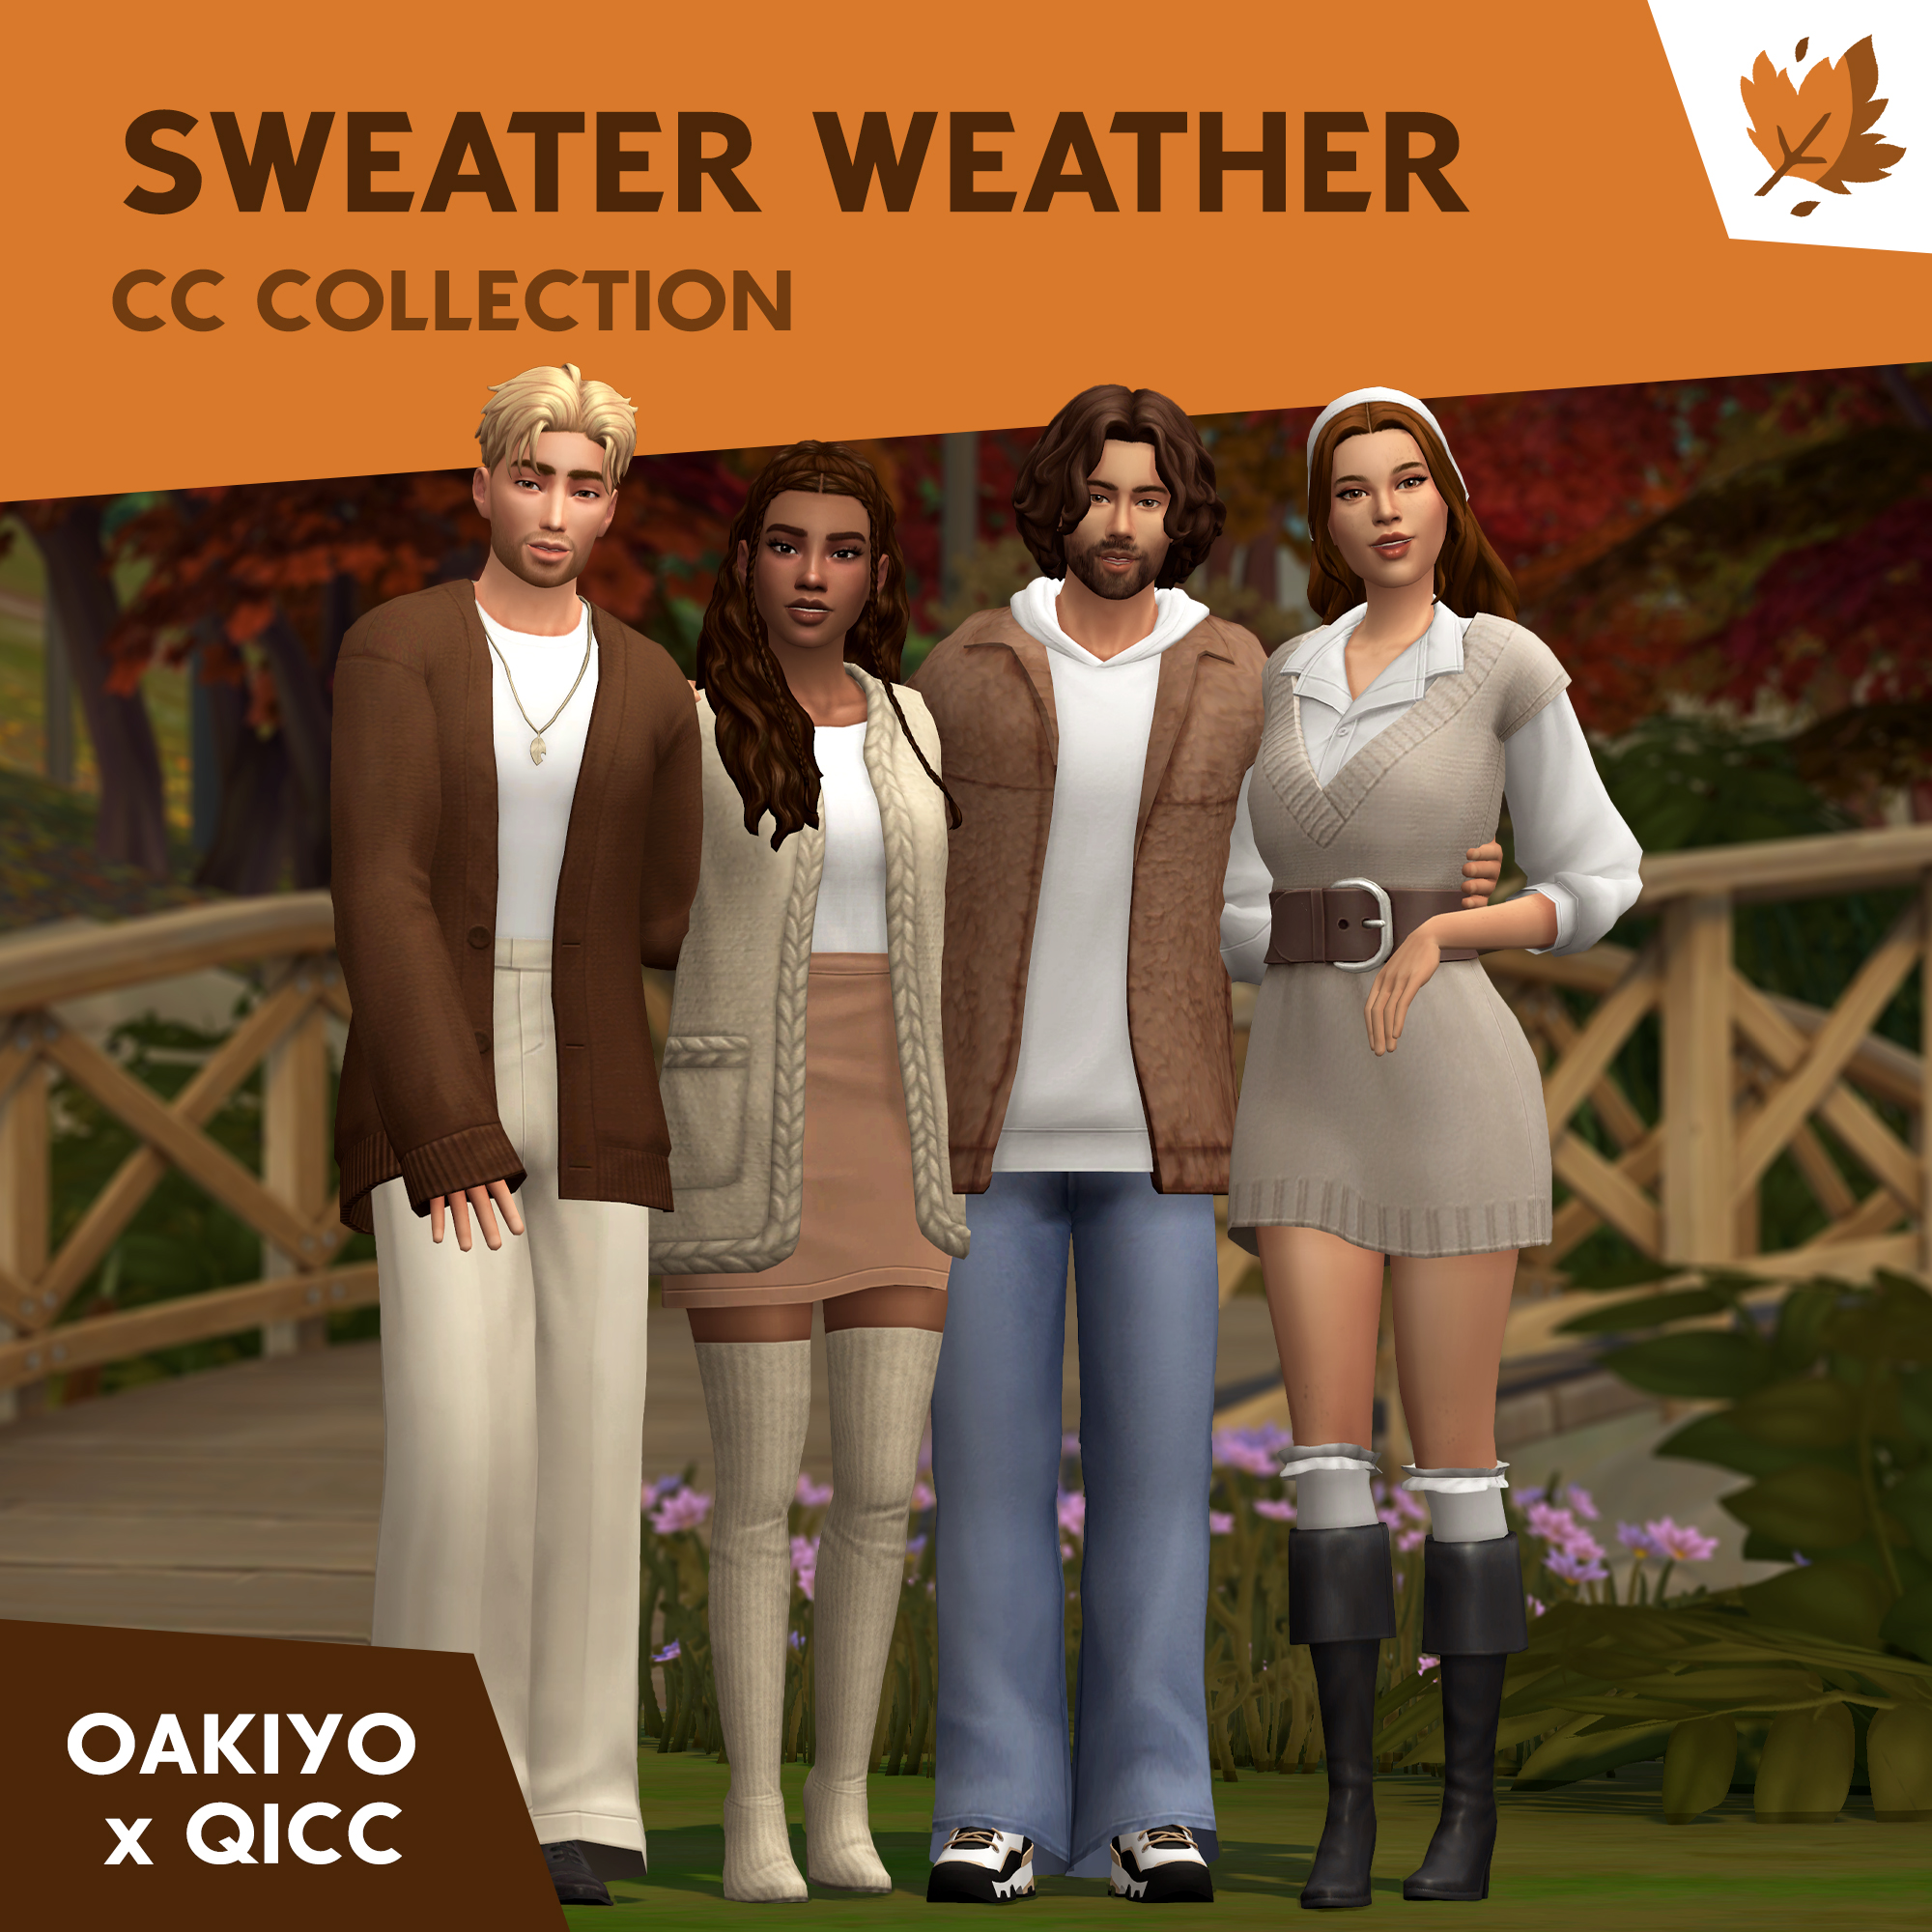 QICC - Sweater Weather Collection project avatar